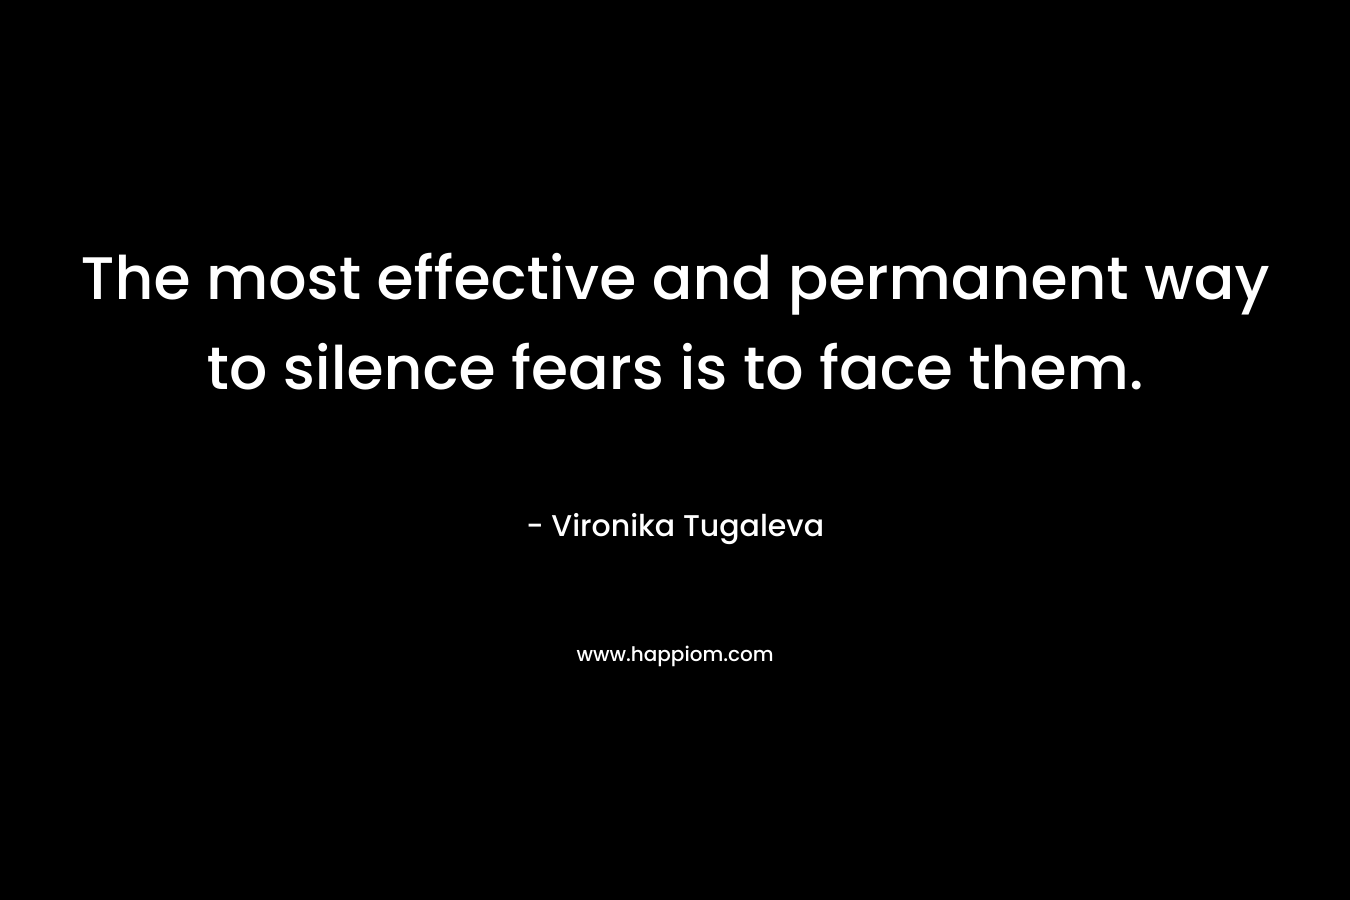 The most effective and permanent way to silence fears is to face them.